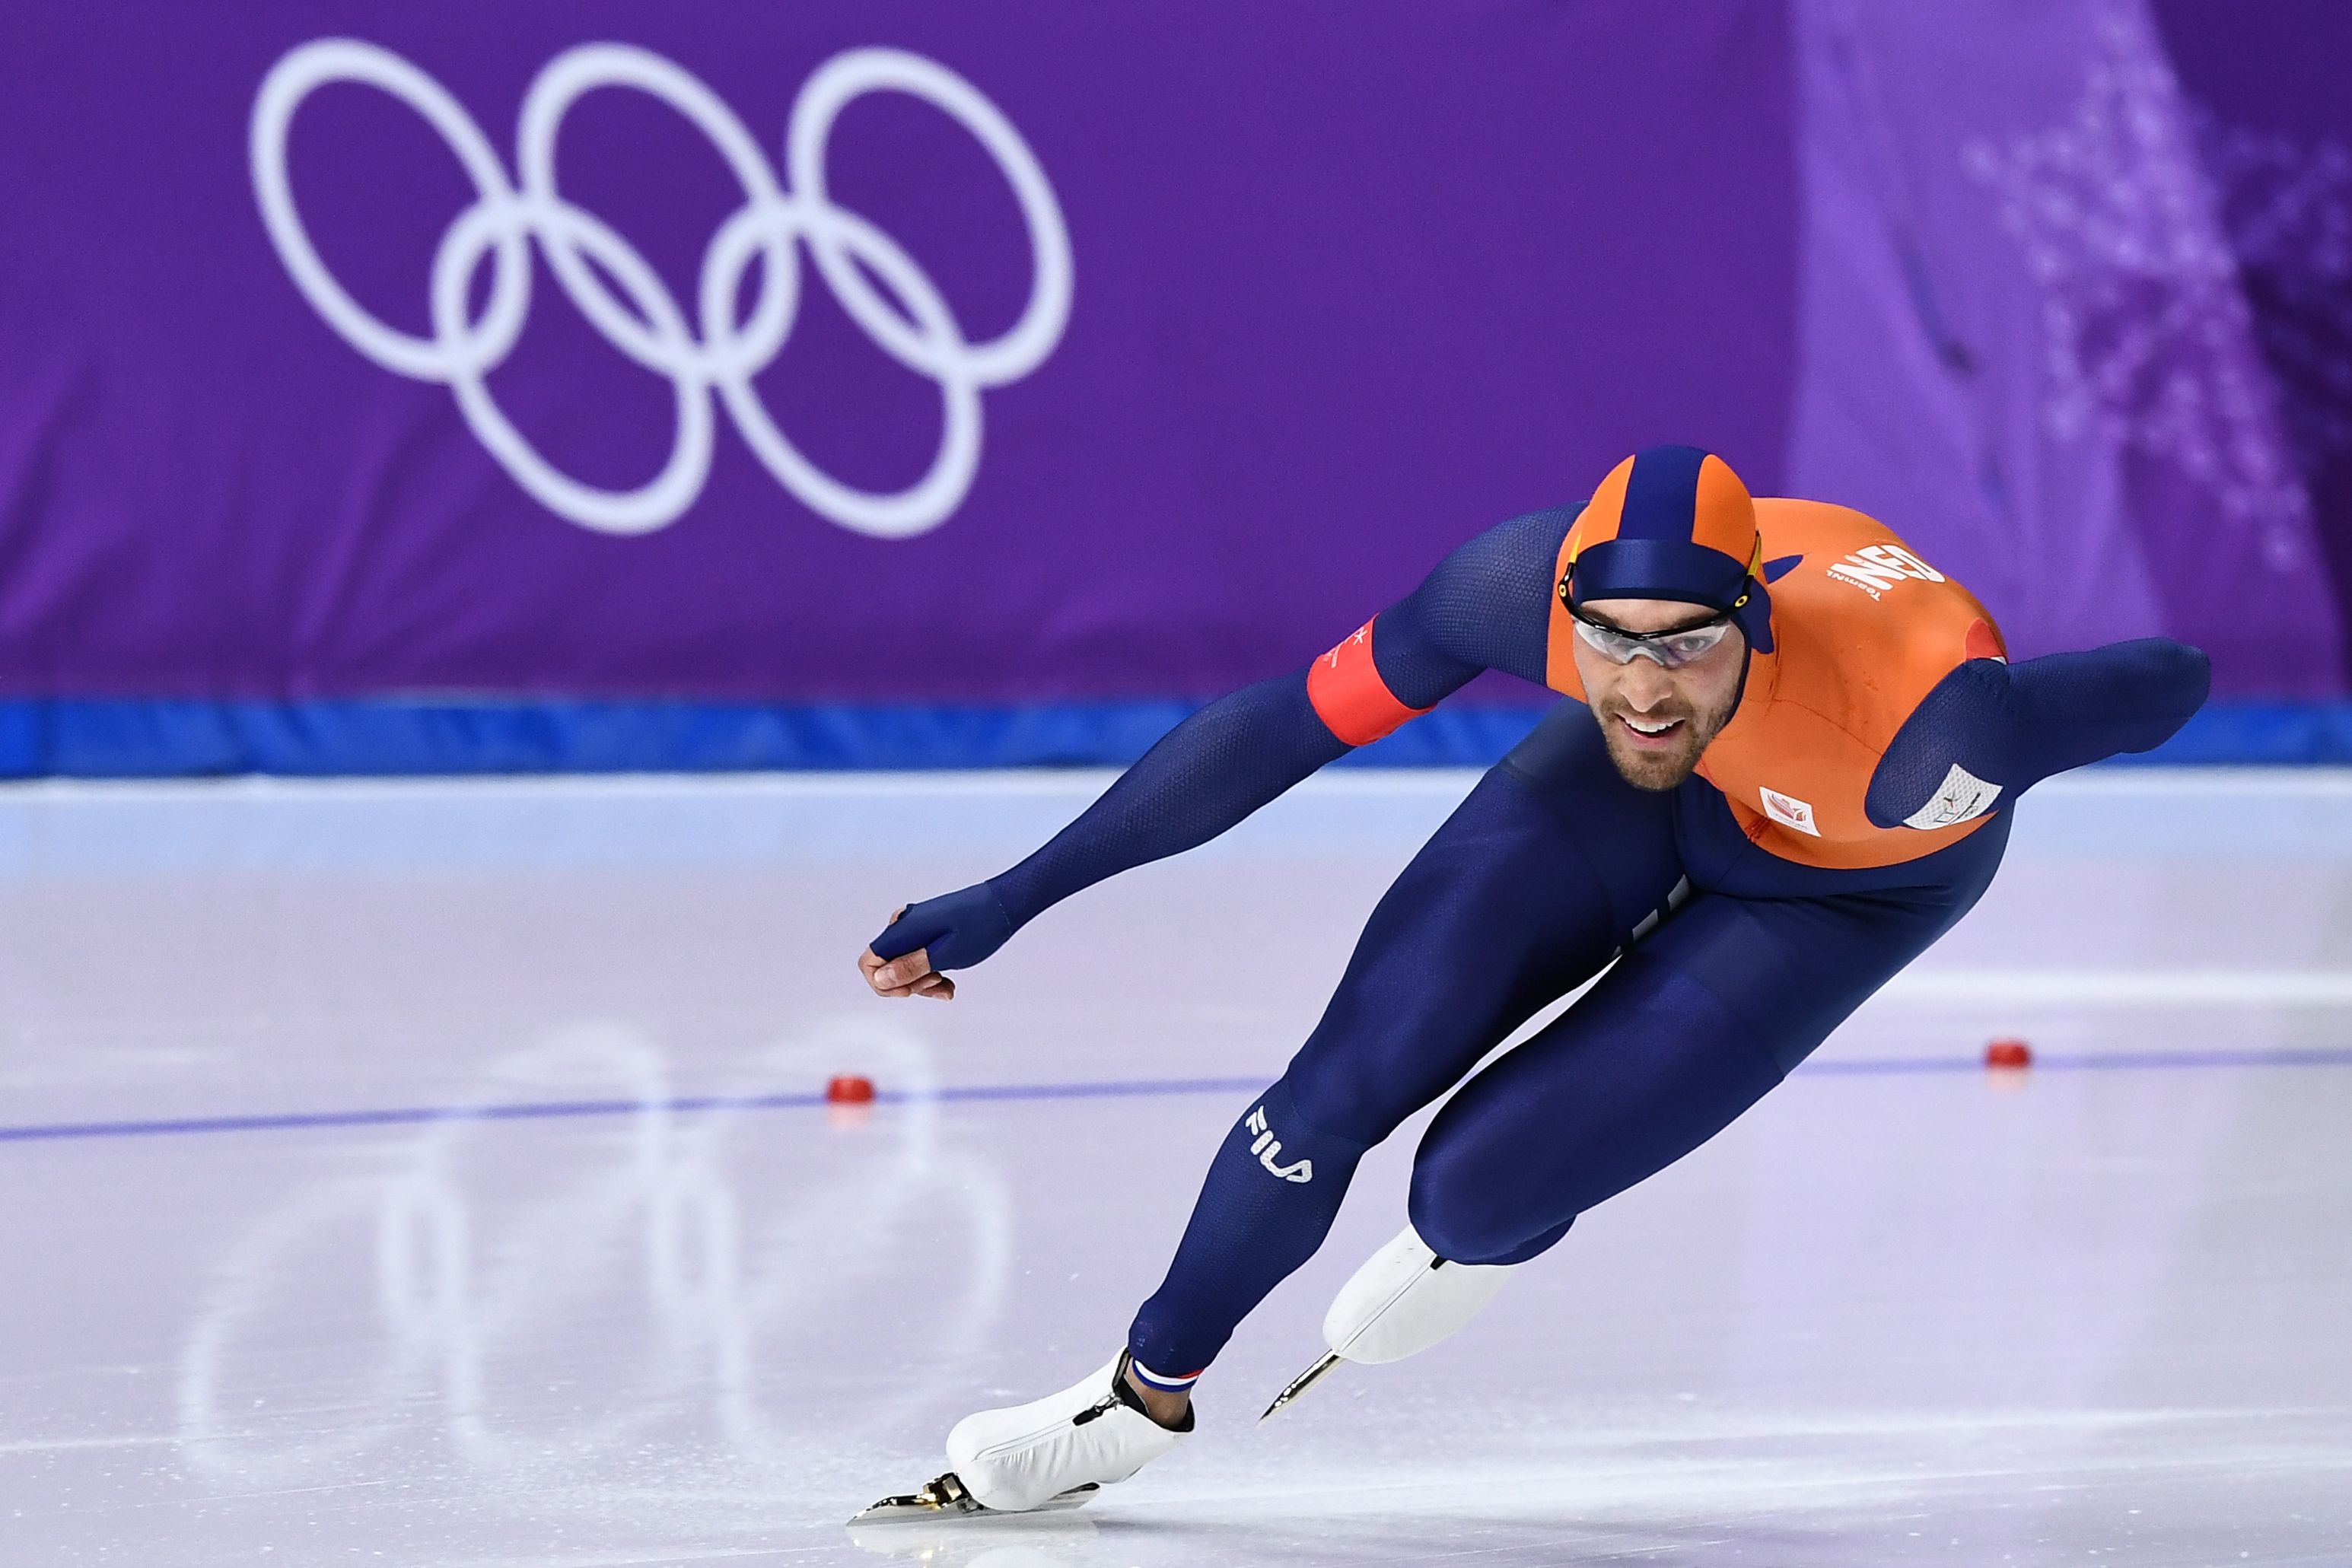 Speed skating, Winter Olympics sports activities ranked - Travel Knowledge